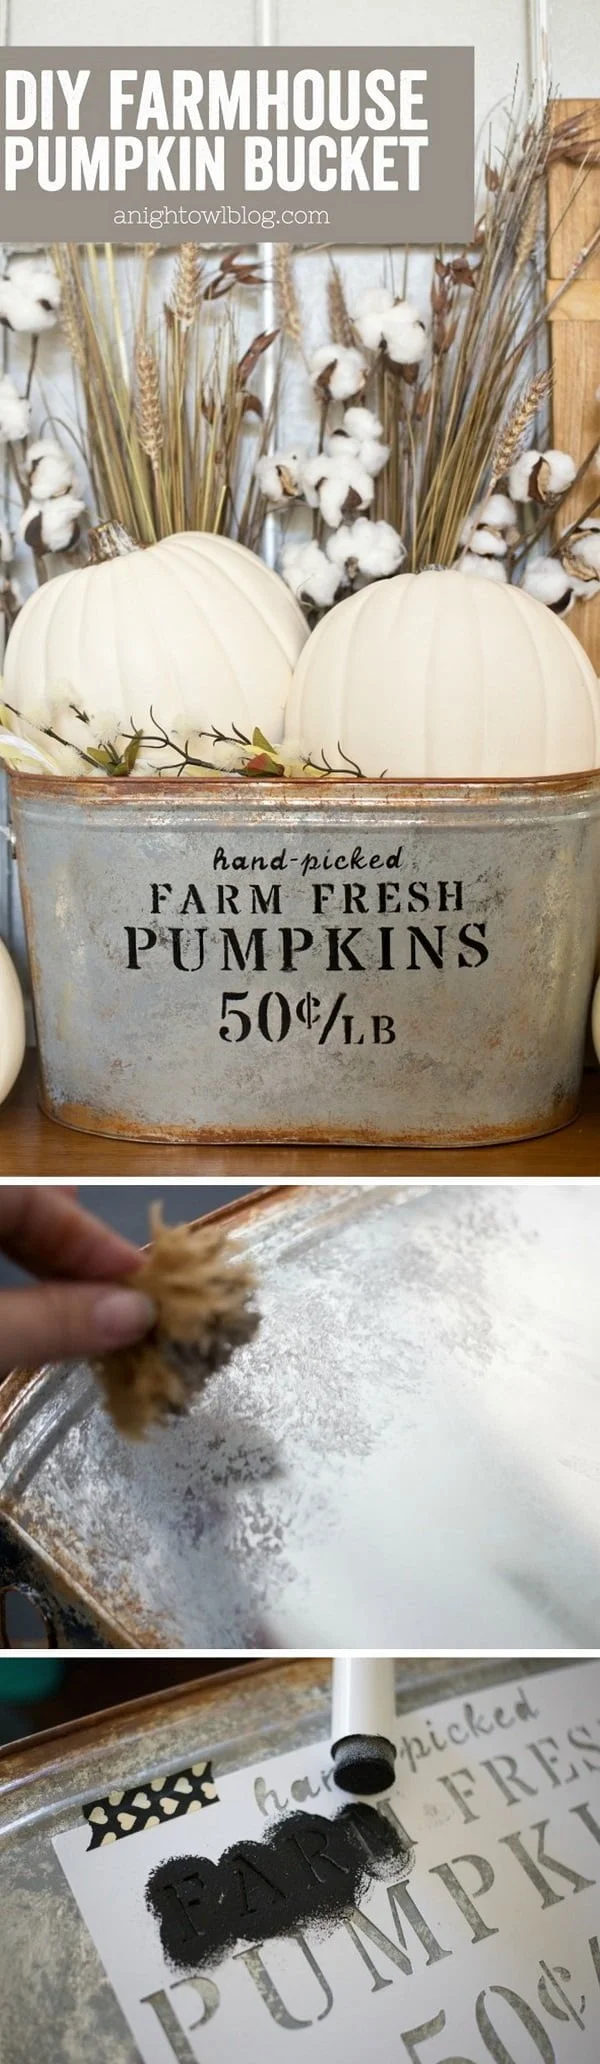 Check out the tutorial on how to make a DIY farmhouse pumpkin bucket for fall decor